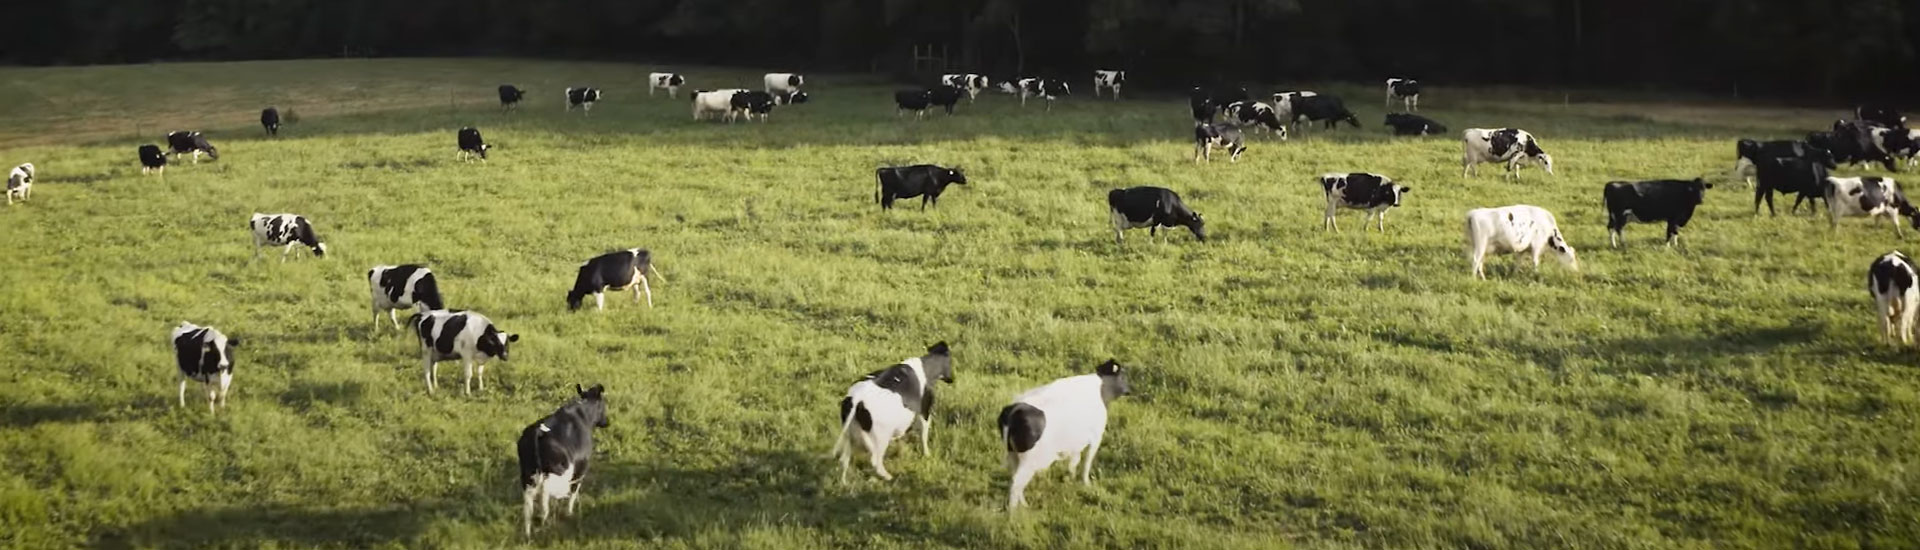 How Hitachi and Happy Cow Creamery Are Using Smart Technology to Advance Agriculture